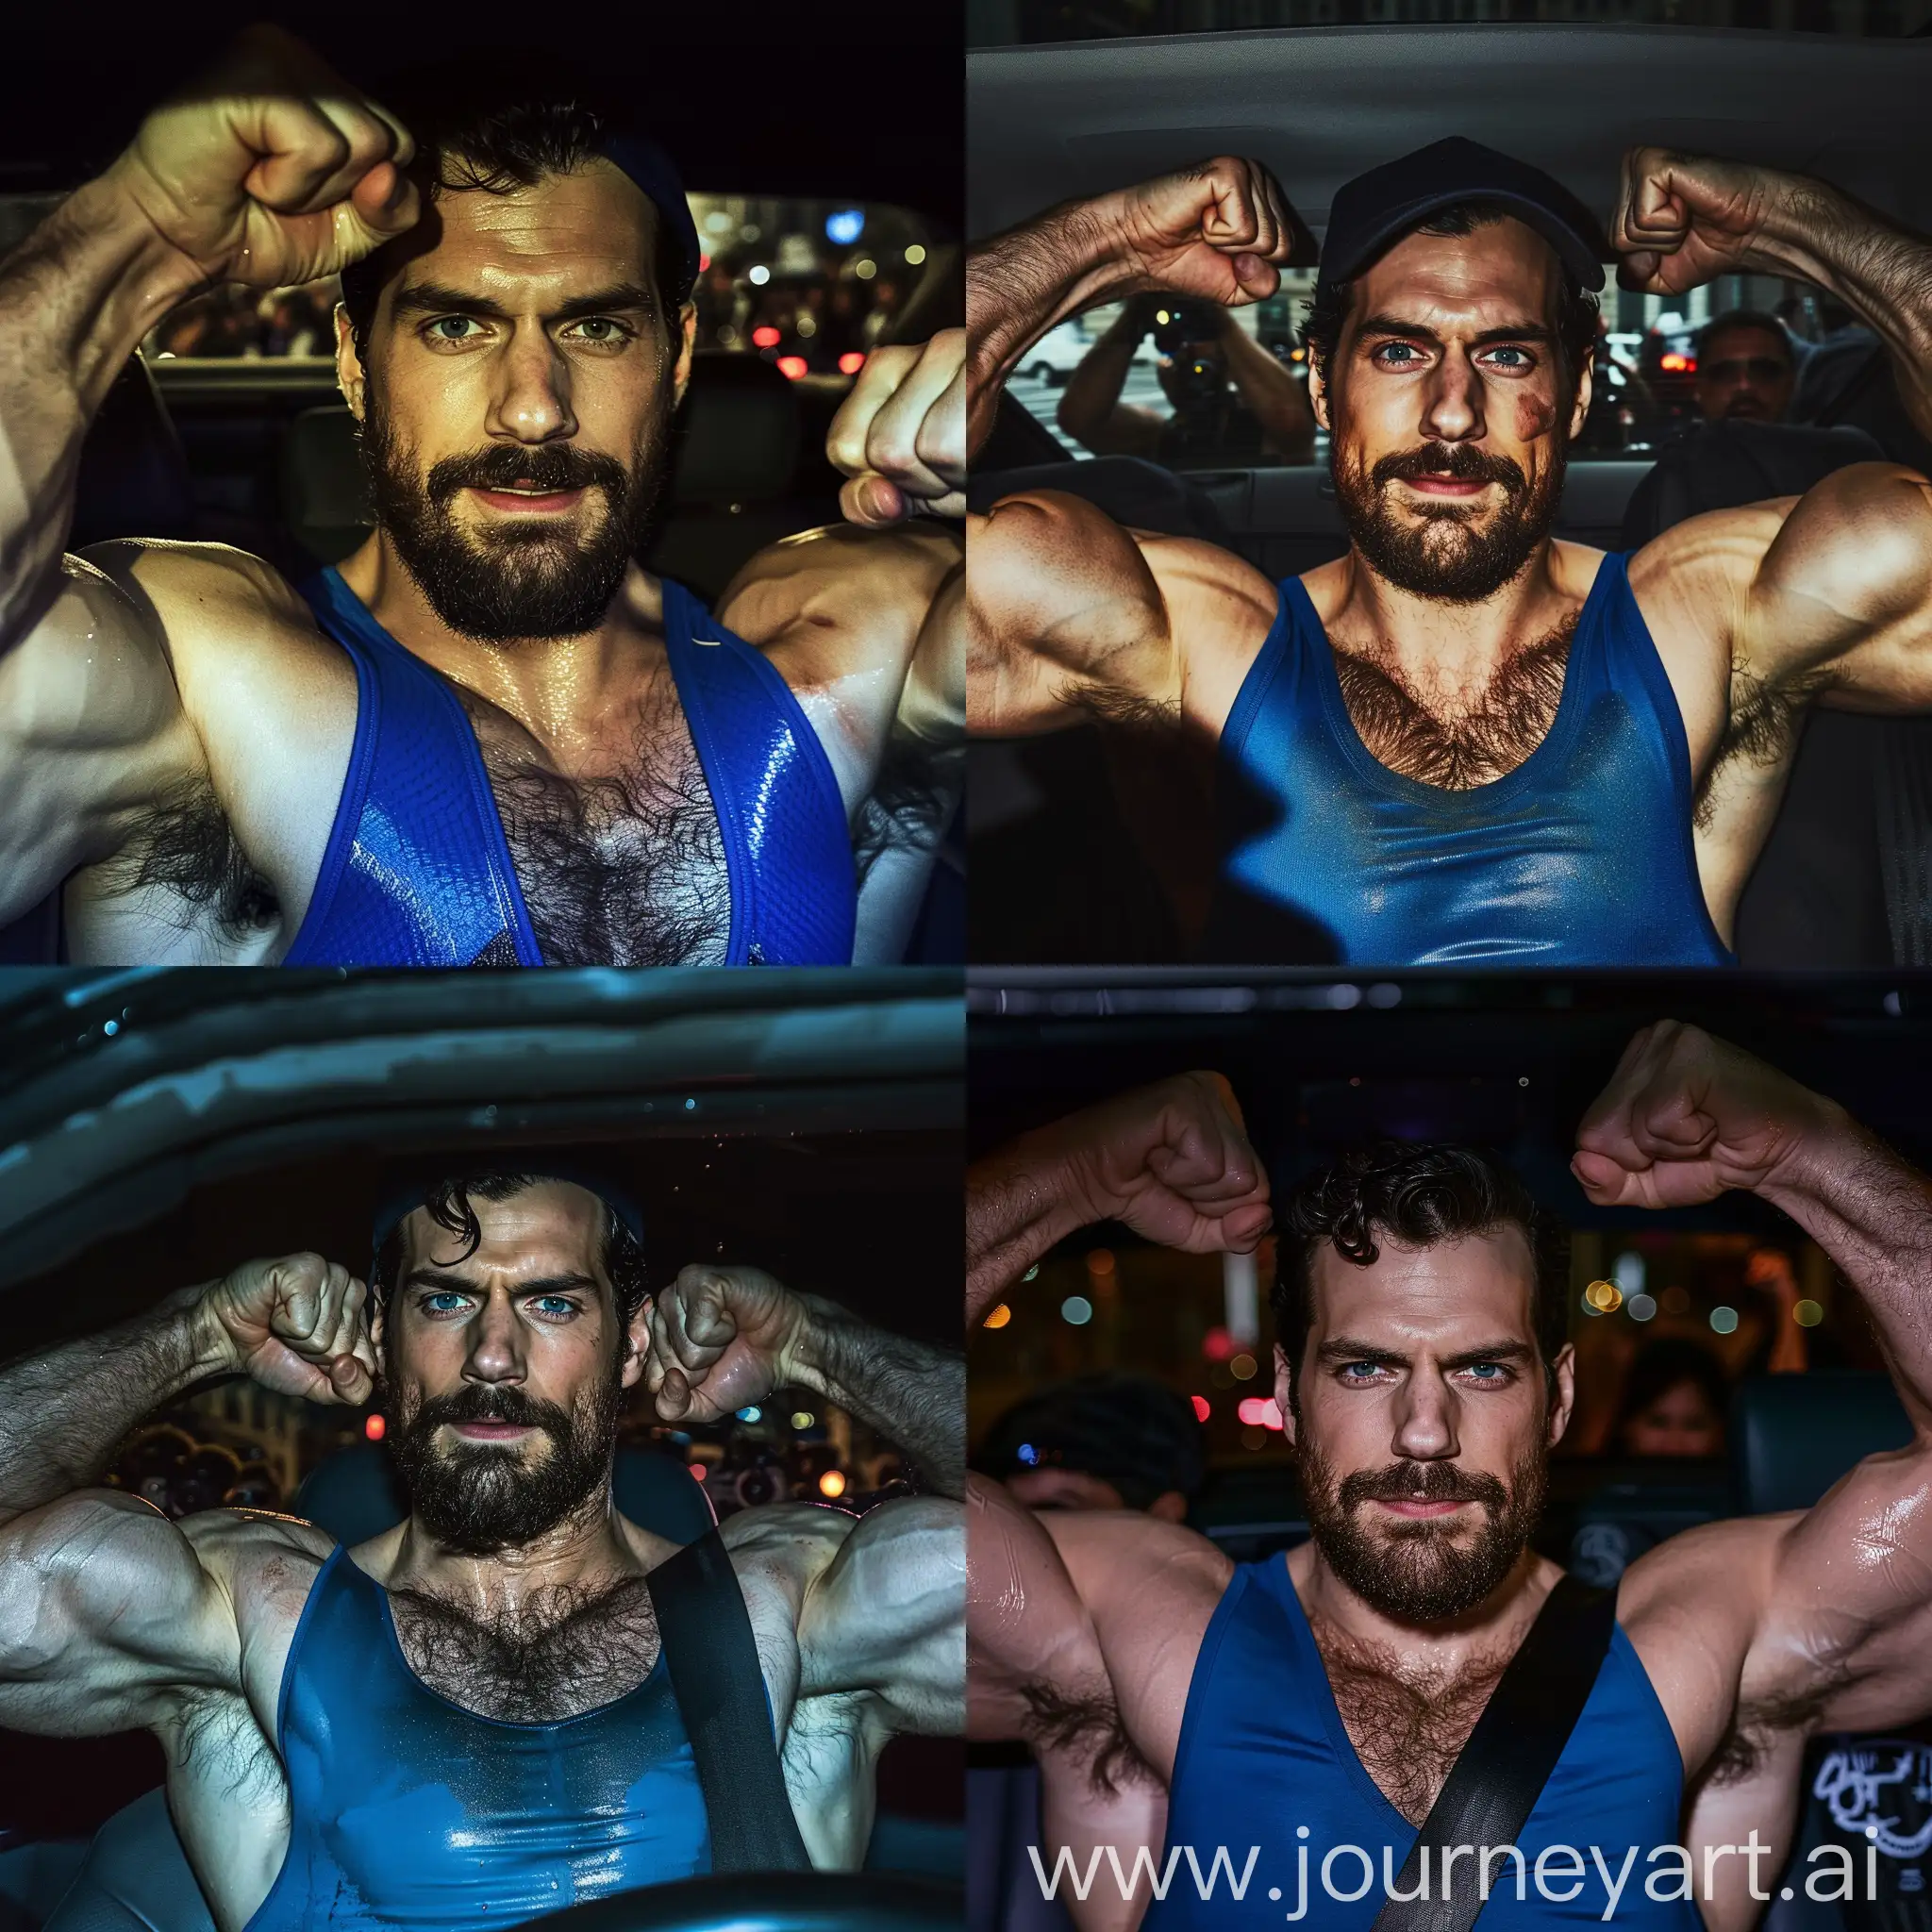 Film lighting, handsome face of actor Henry Cavill, a handsome and burly muscular man in the back seat of the car, wearing a blue tank top, hairy chest big pecs, bearded and handsome Henry Cavill inside a car, dim lighting, sweaty and glistening skin, flexing both his arms, big muscular biceps, wearing a black cap, blurred background paparazzis outside the car